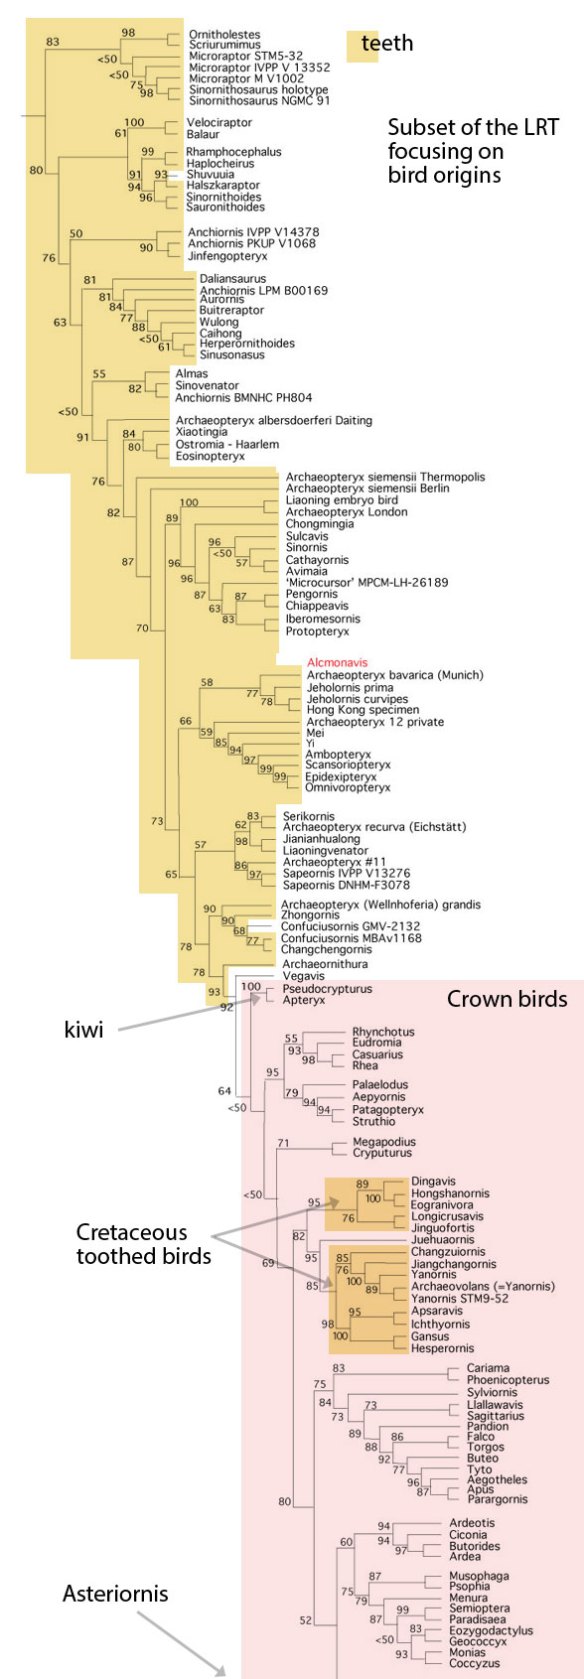 Figure 2. Subset of the LRT focusing on bird origins. Crown birds and toothed birds are highlighted.